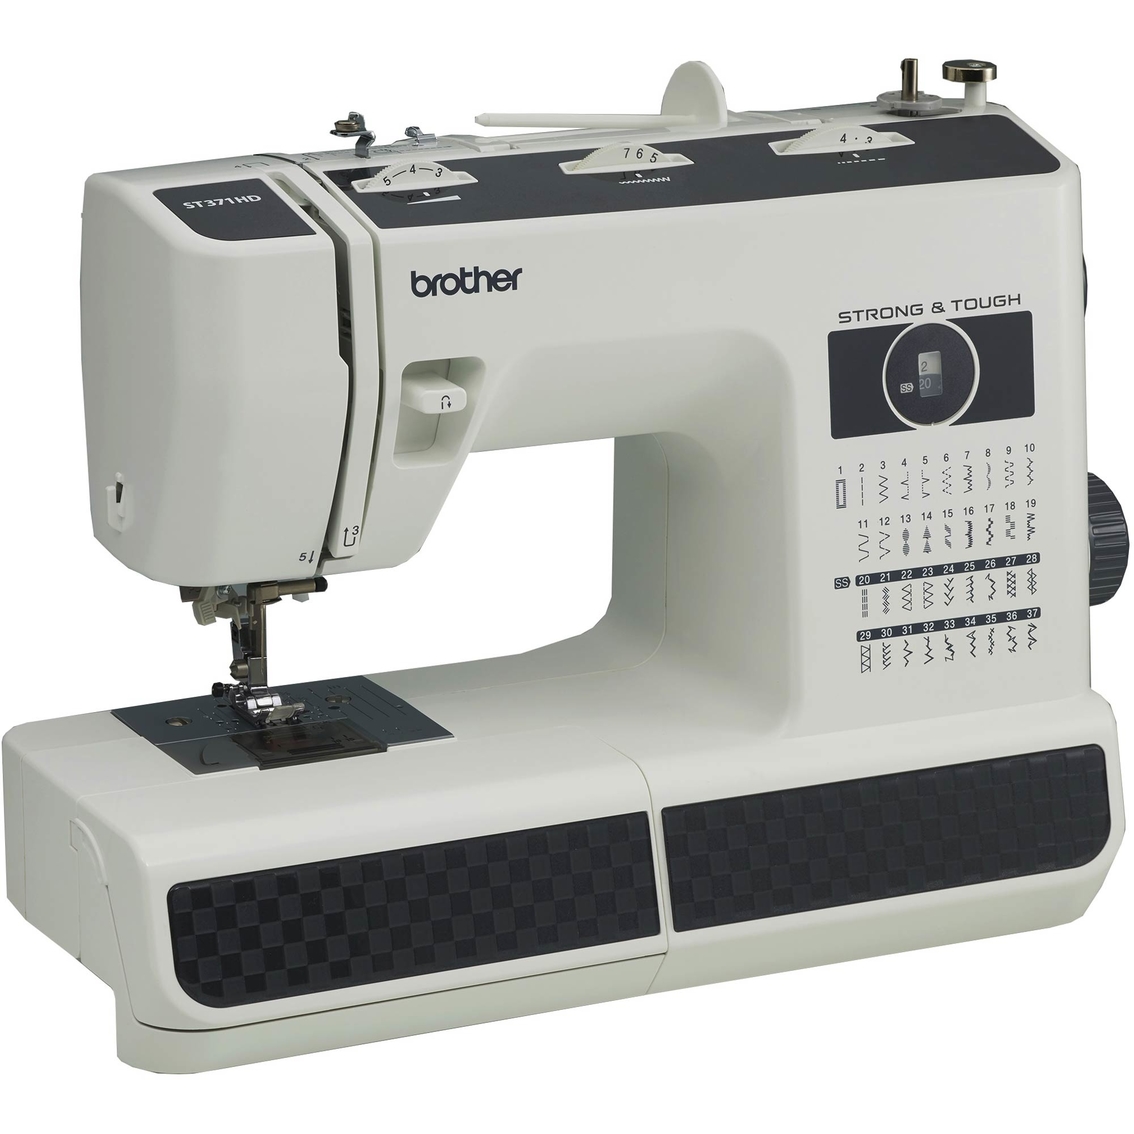 Brother 37 Stitch Strong Tough Sewing Machine - Image 2 of 4